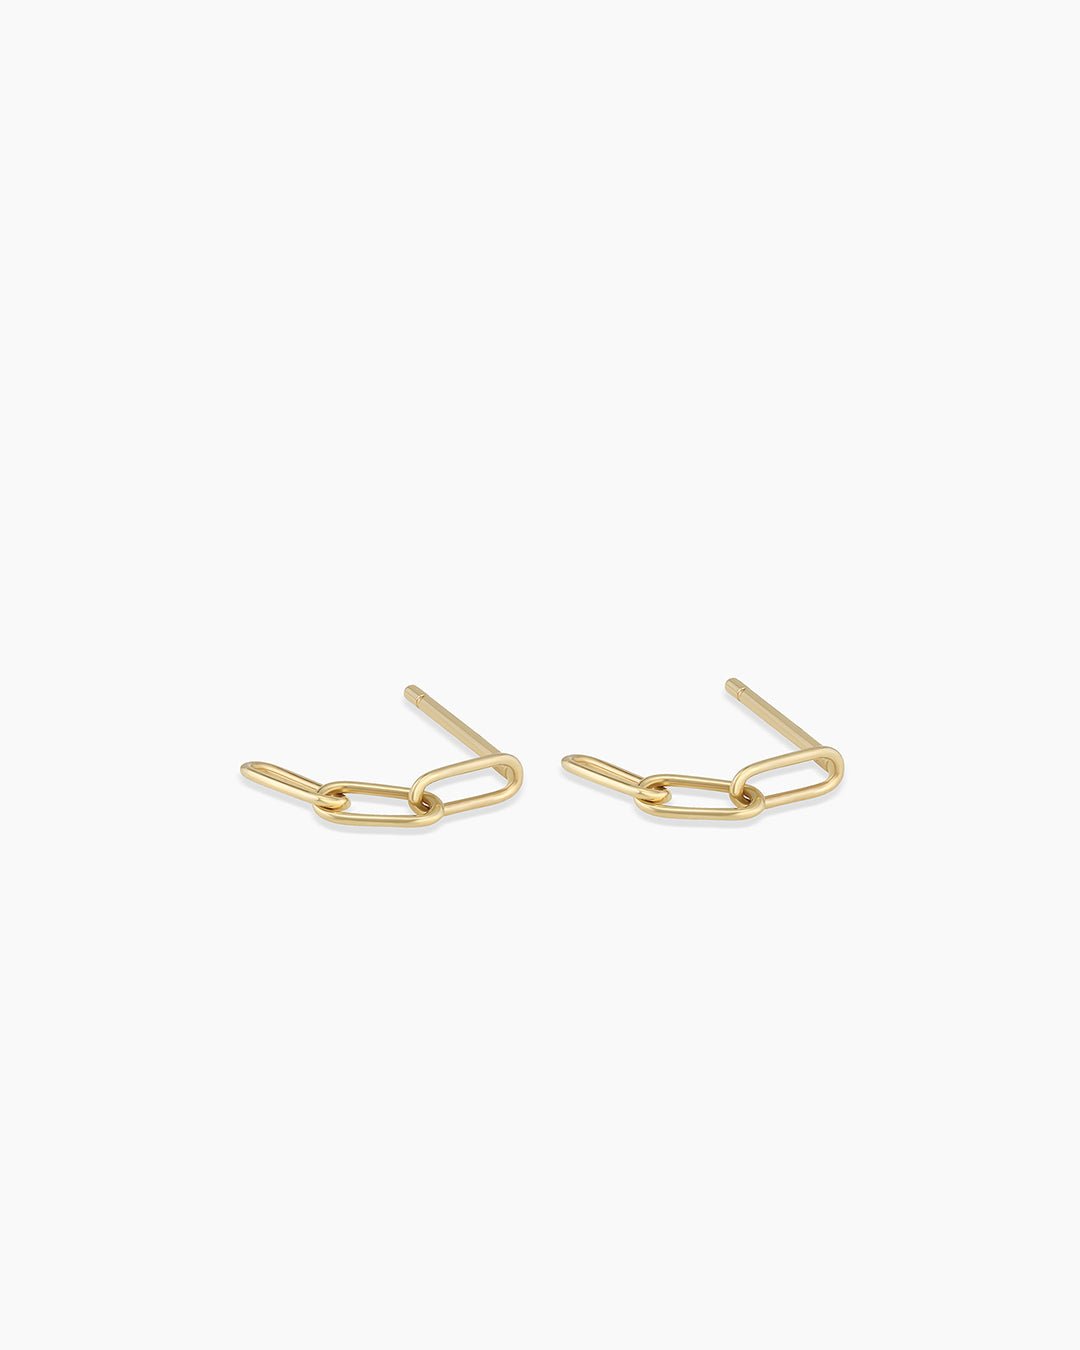 Woman wearing Parker Earring || option::14k Solid Gold, Pair